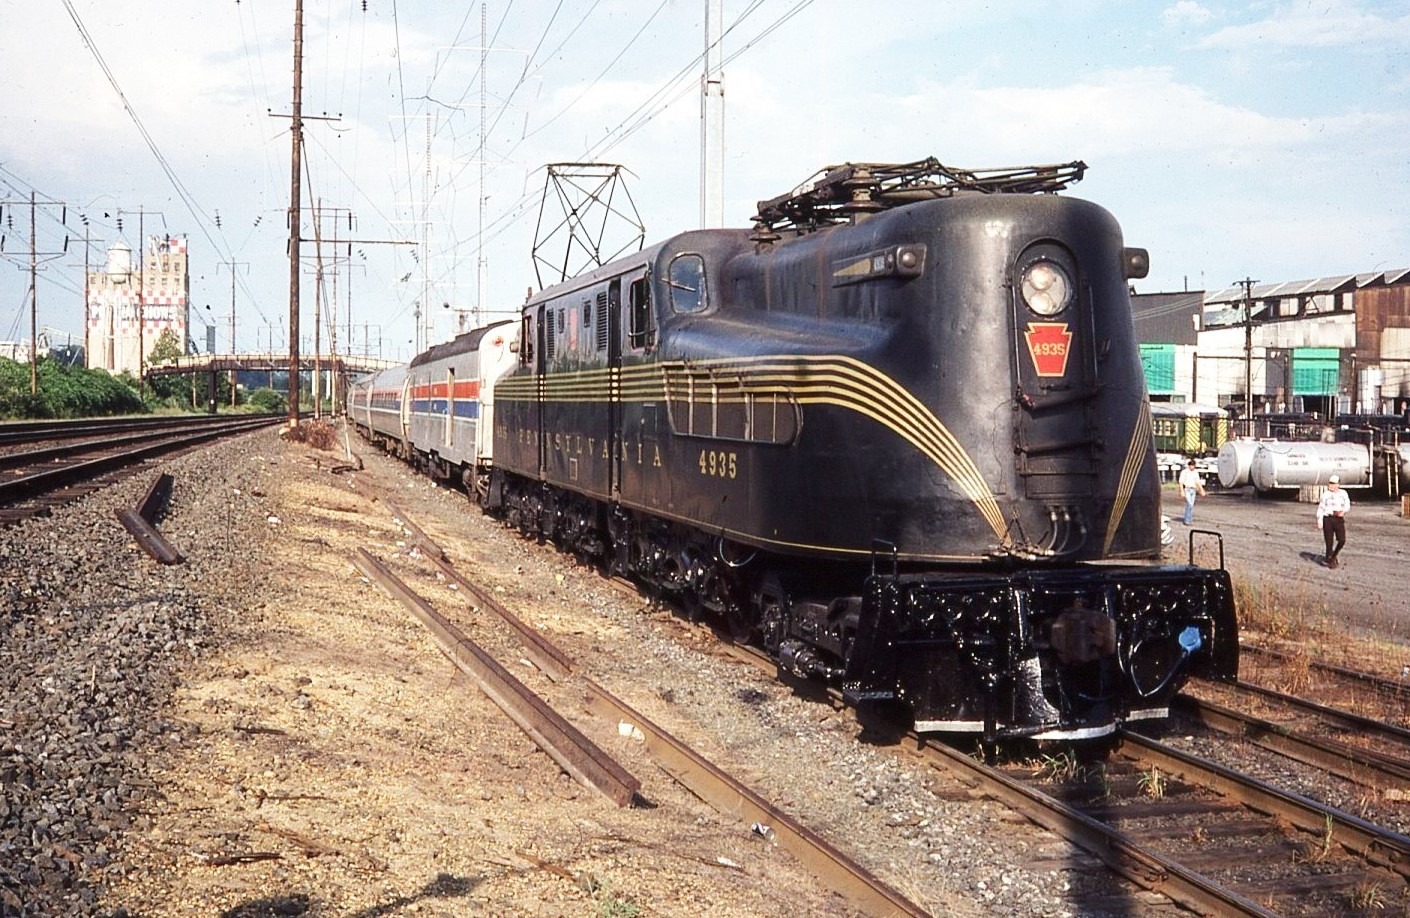 Amtrak | Pennsylvania Railroad | Wilmington, Delaware | Altoona Works GG1 #4935 electric motor | 1979 NRHS Convention excursion | September 2, 1979 | Bill Barr photograph